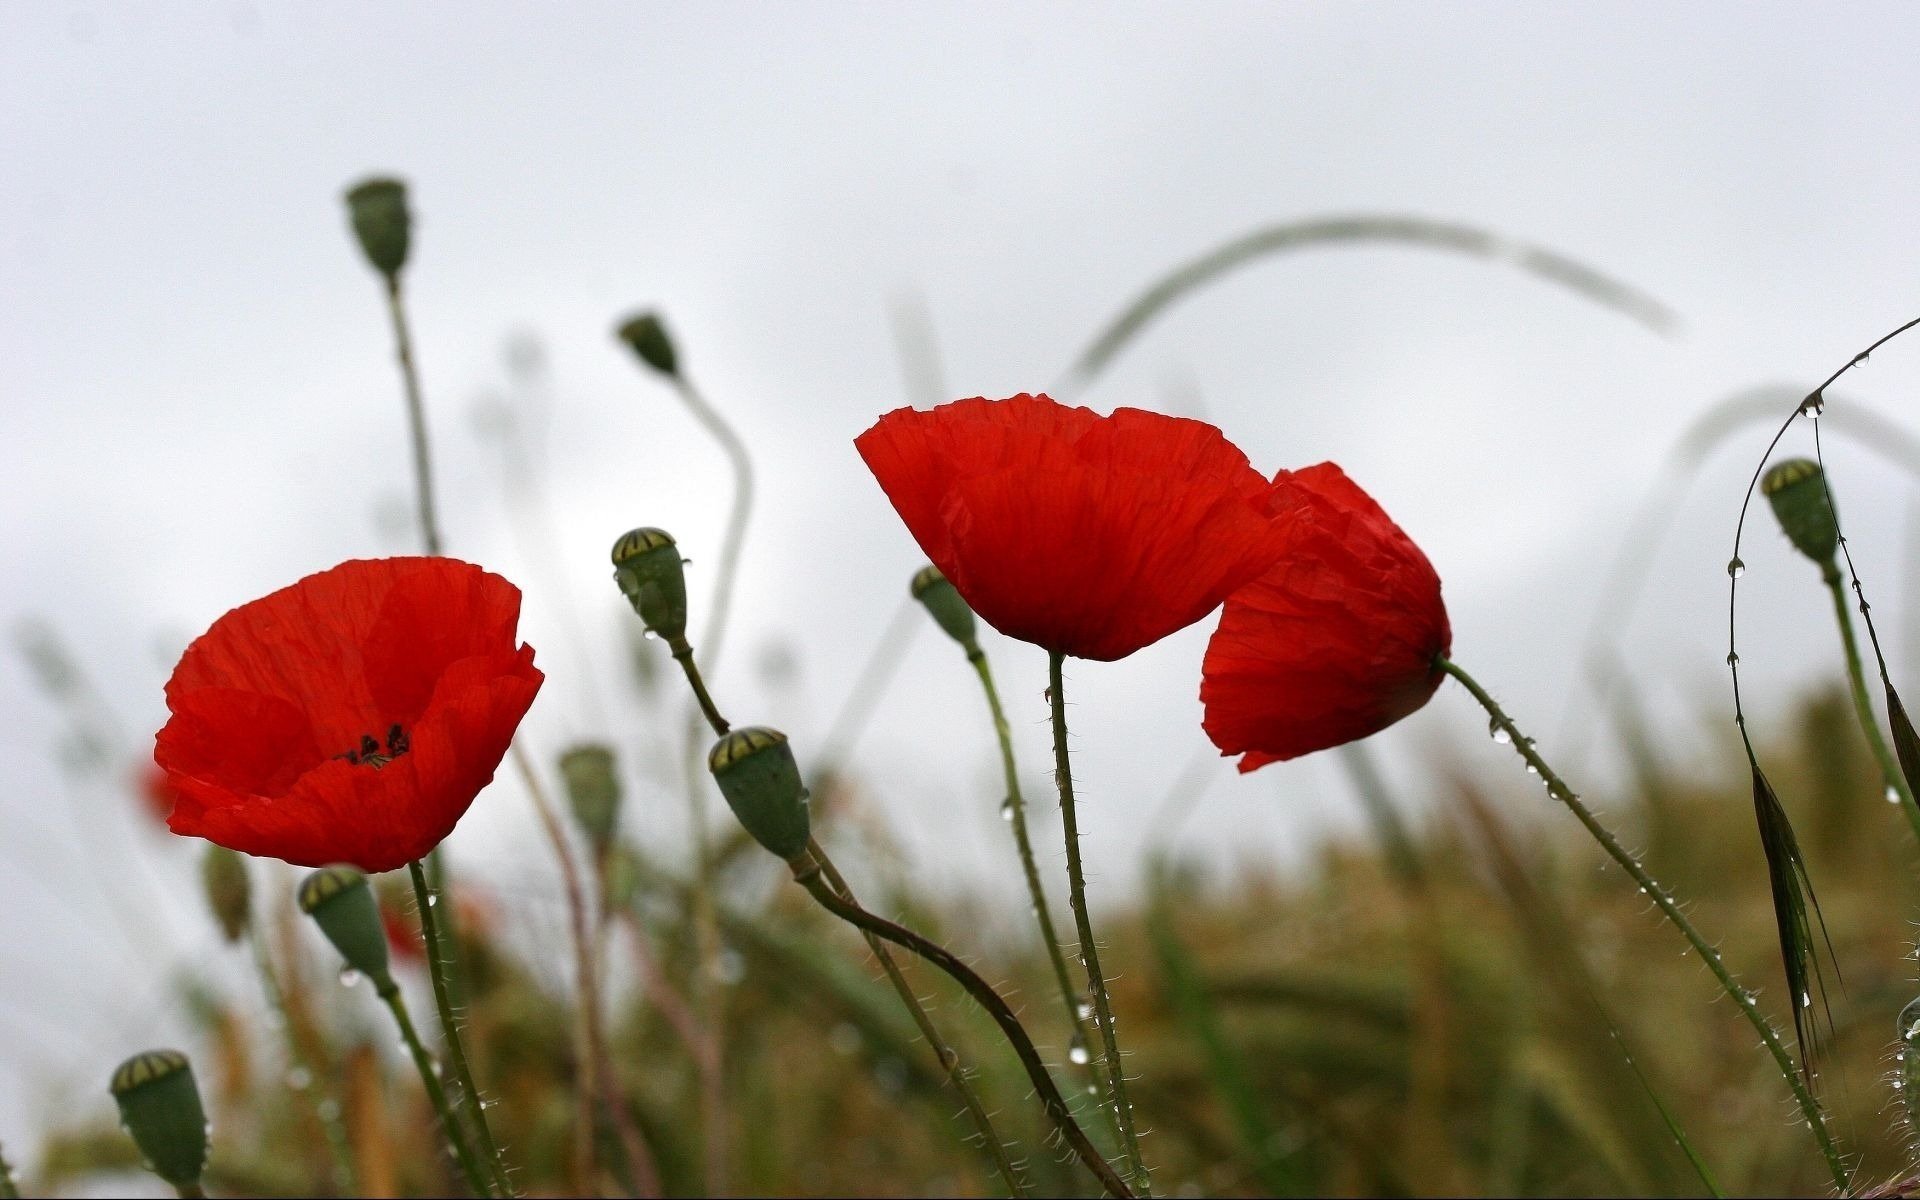 Bright poppies on a gloomy field